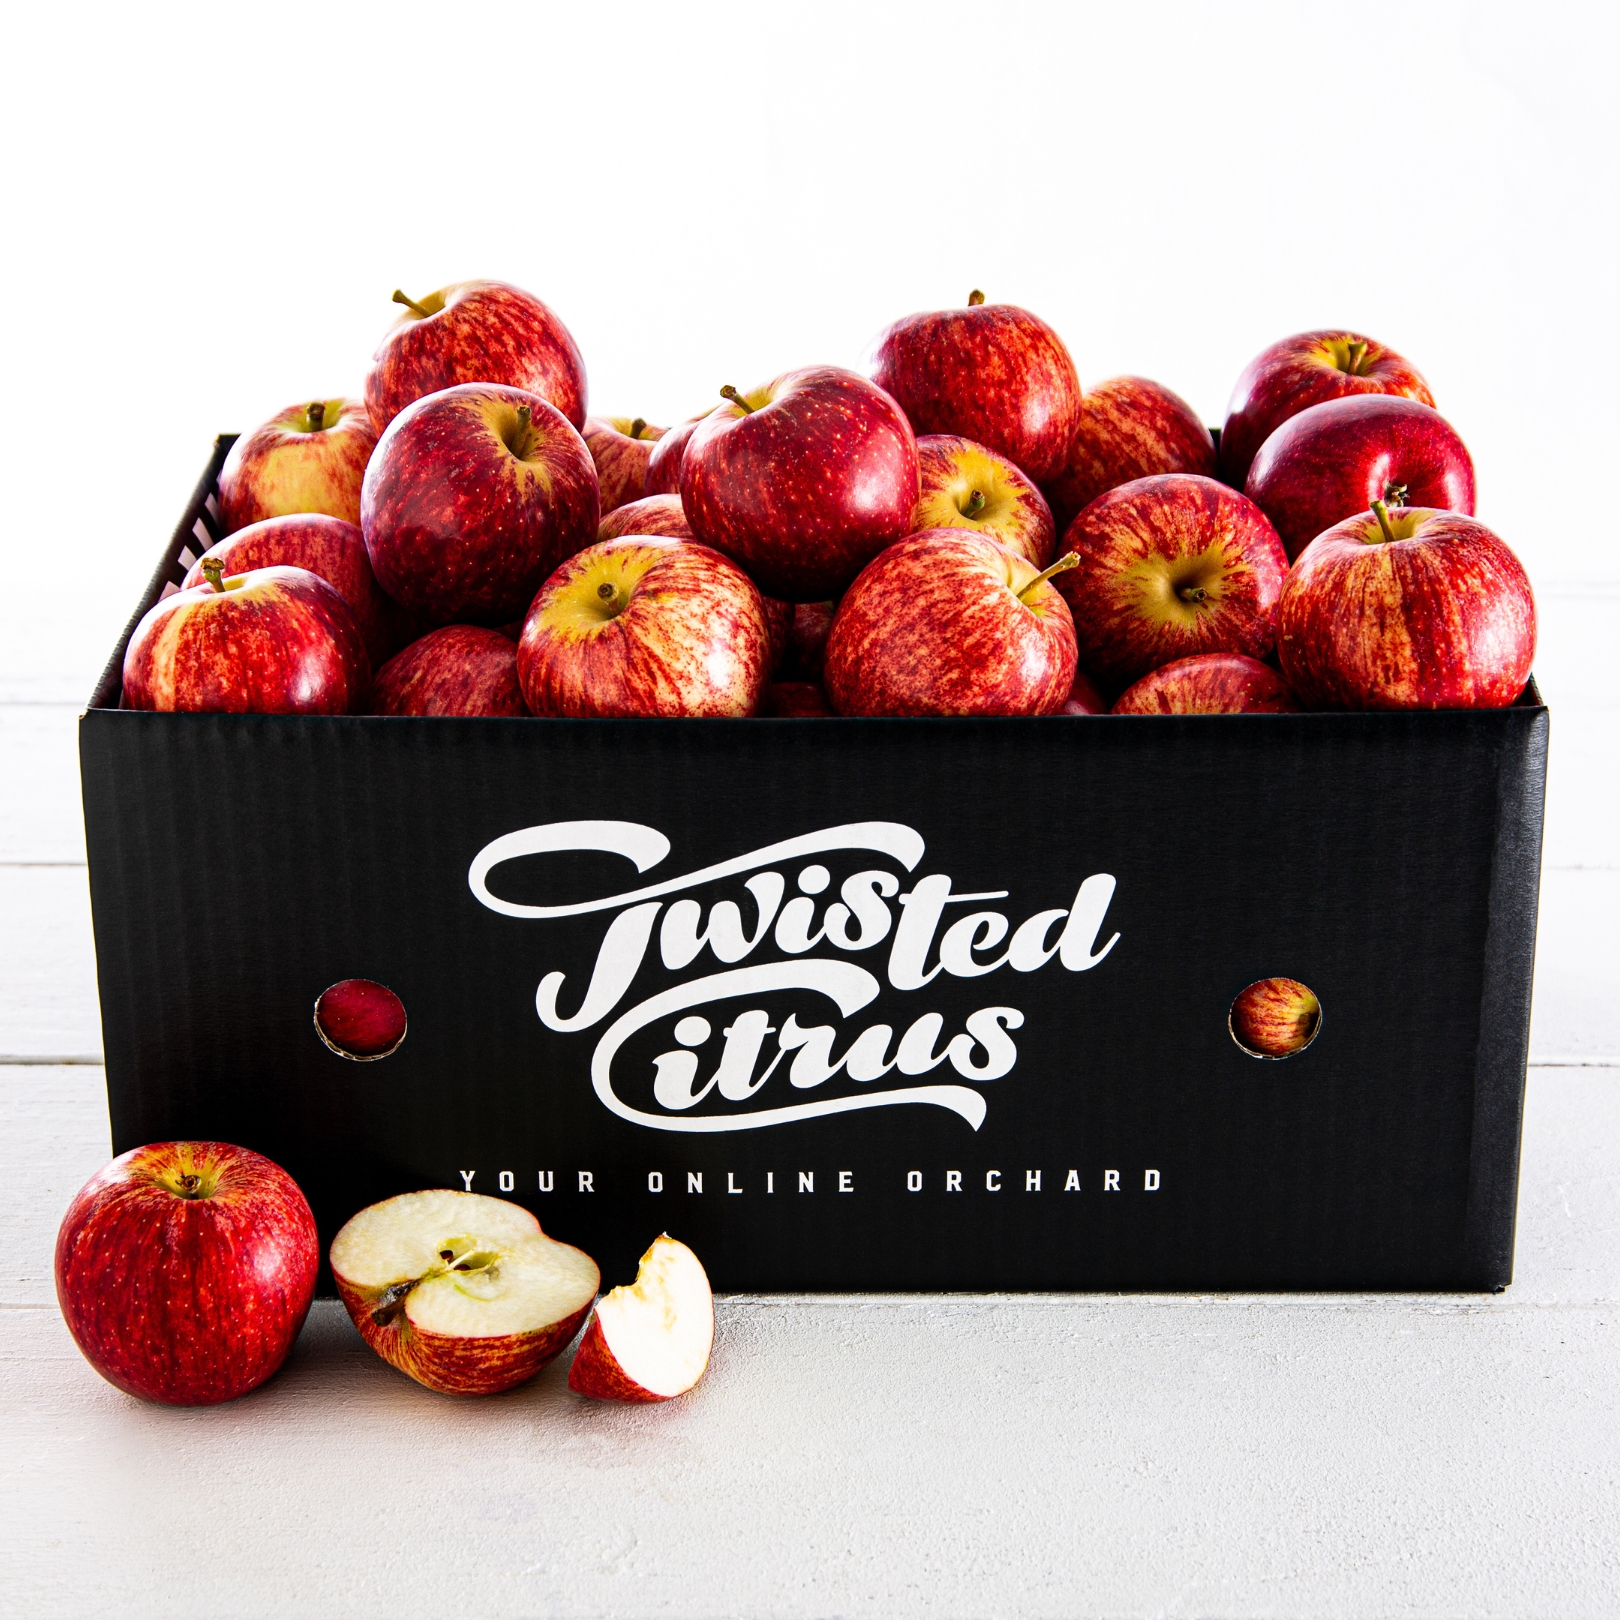 Buy Apples - Royal Gala Online NZ - Twisted Citrus